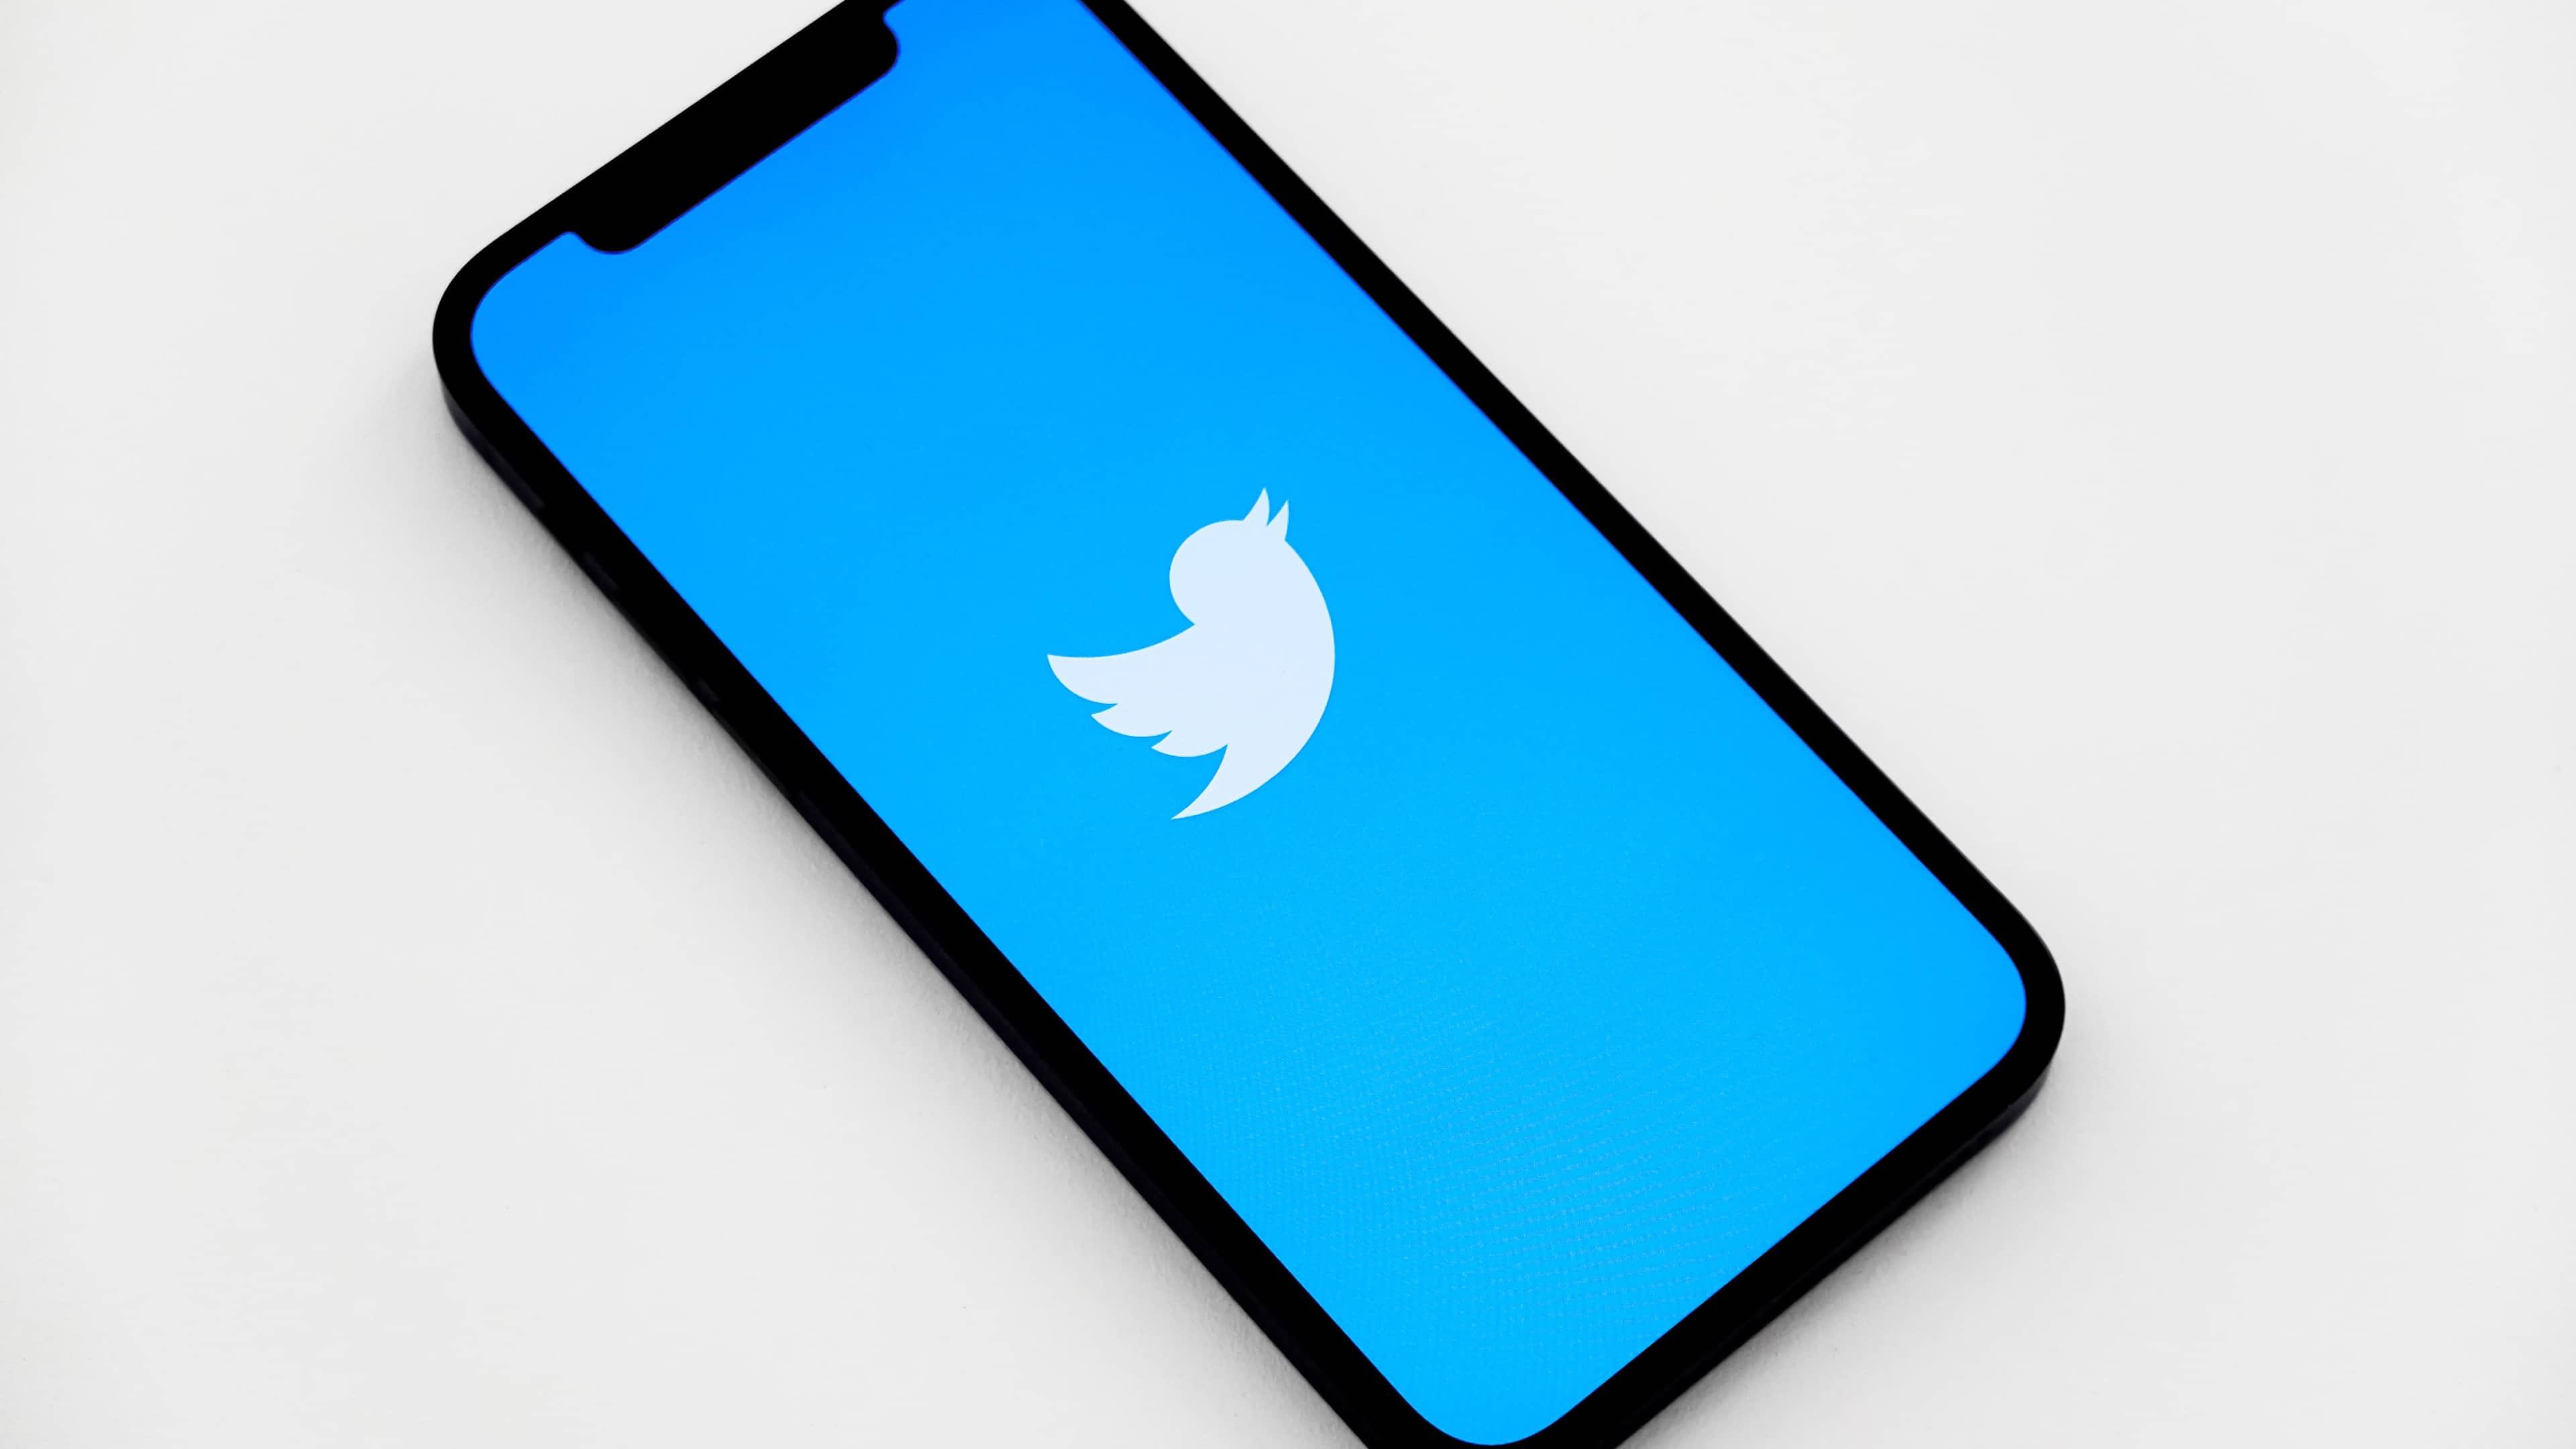 Isometric view of an iPhone showing a white Twitter bird logo on the screen, set against a sold light-blue background